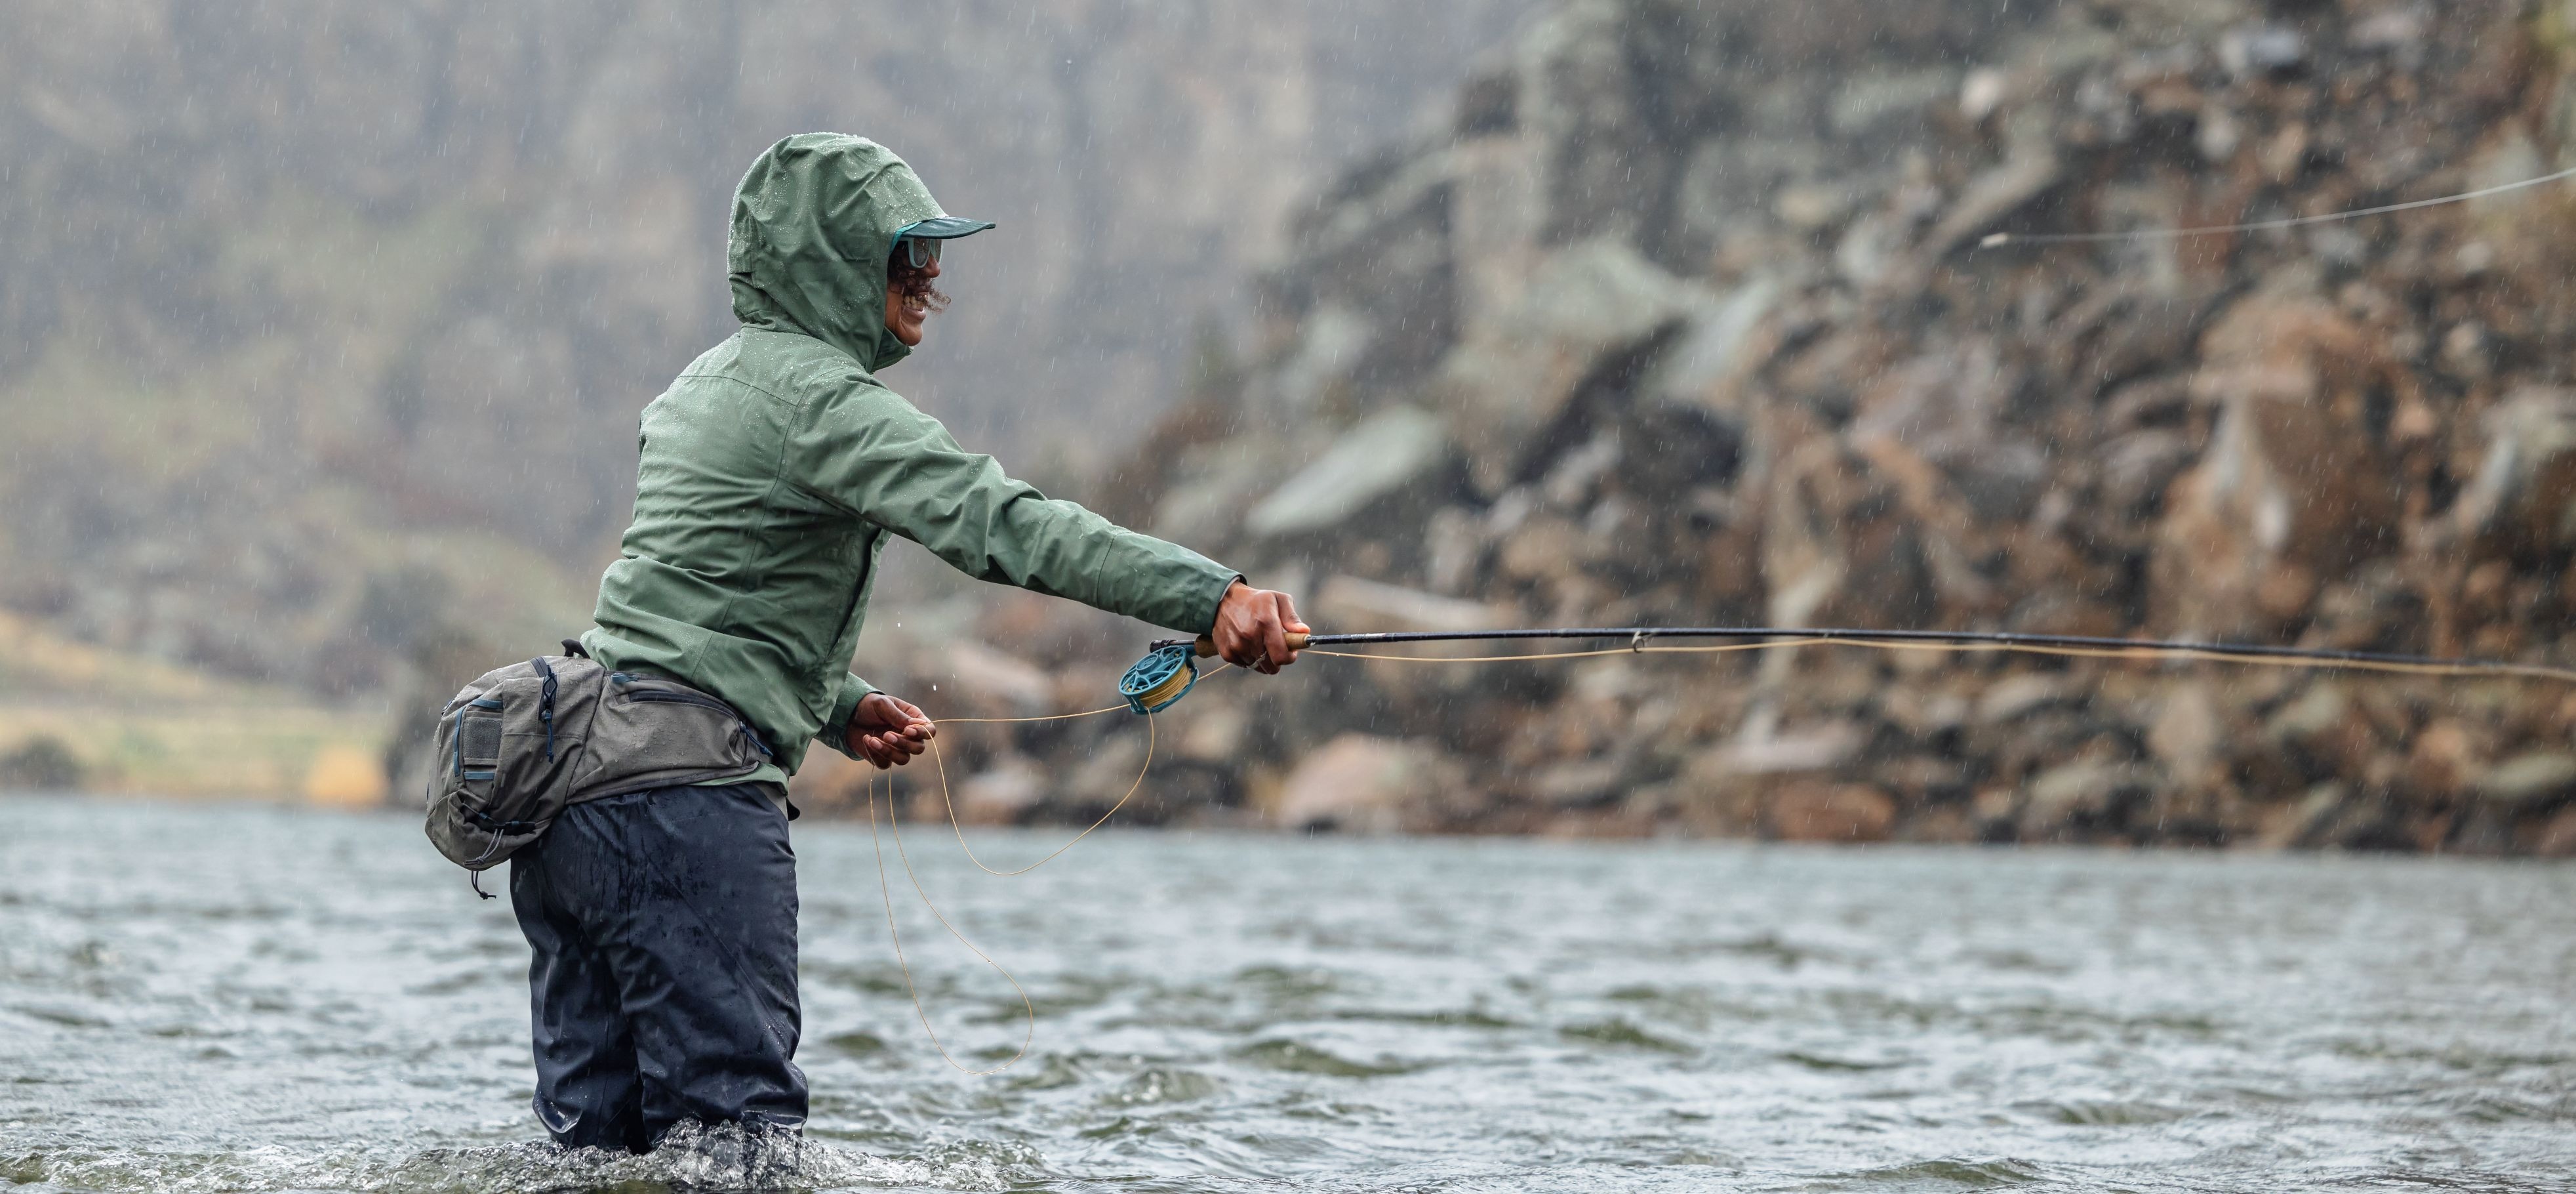 Shop Fly Fishing Hip Packs: Patagonia, Simms, and More